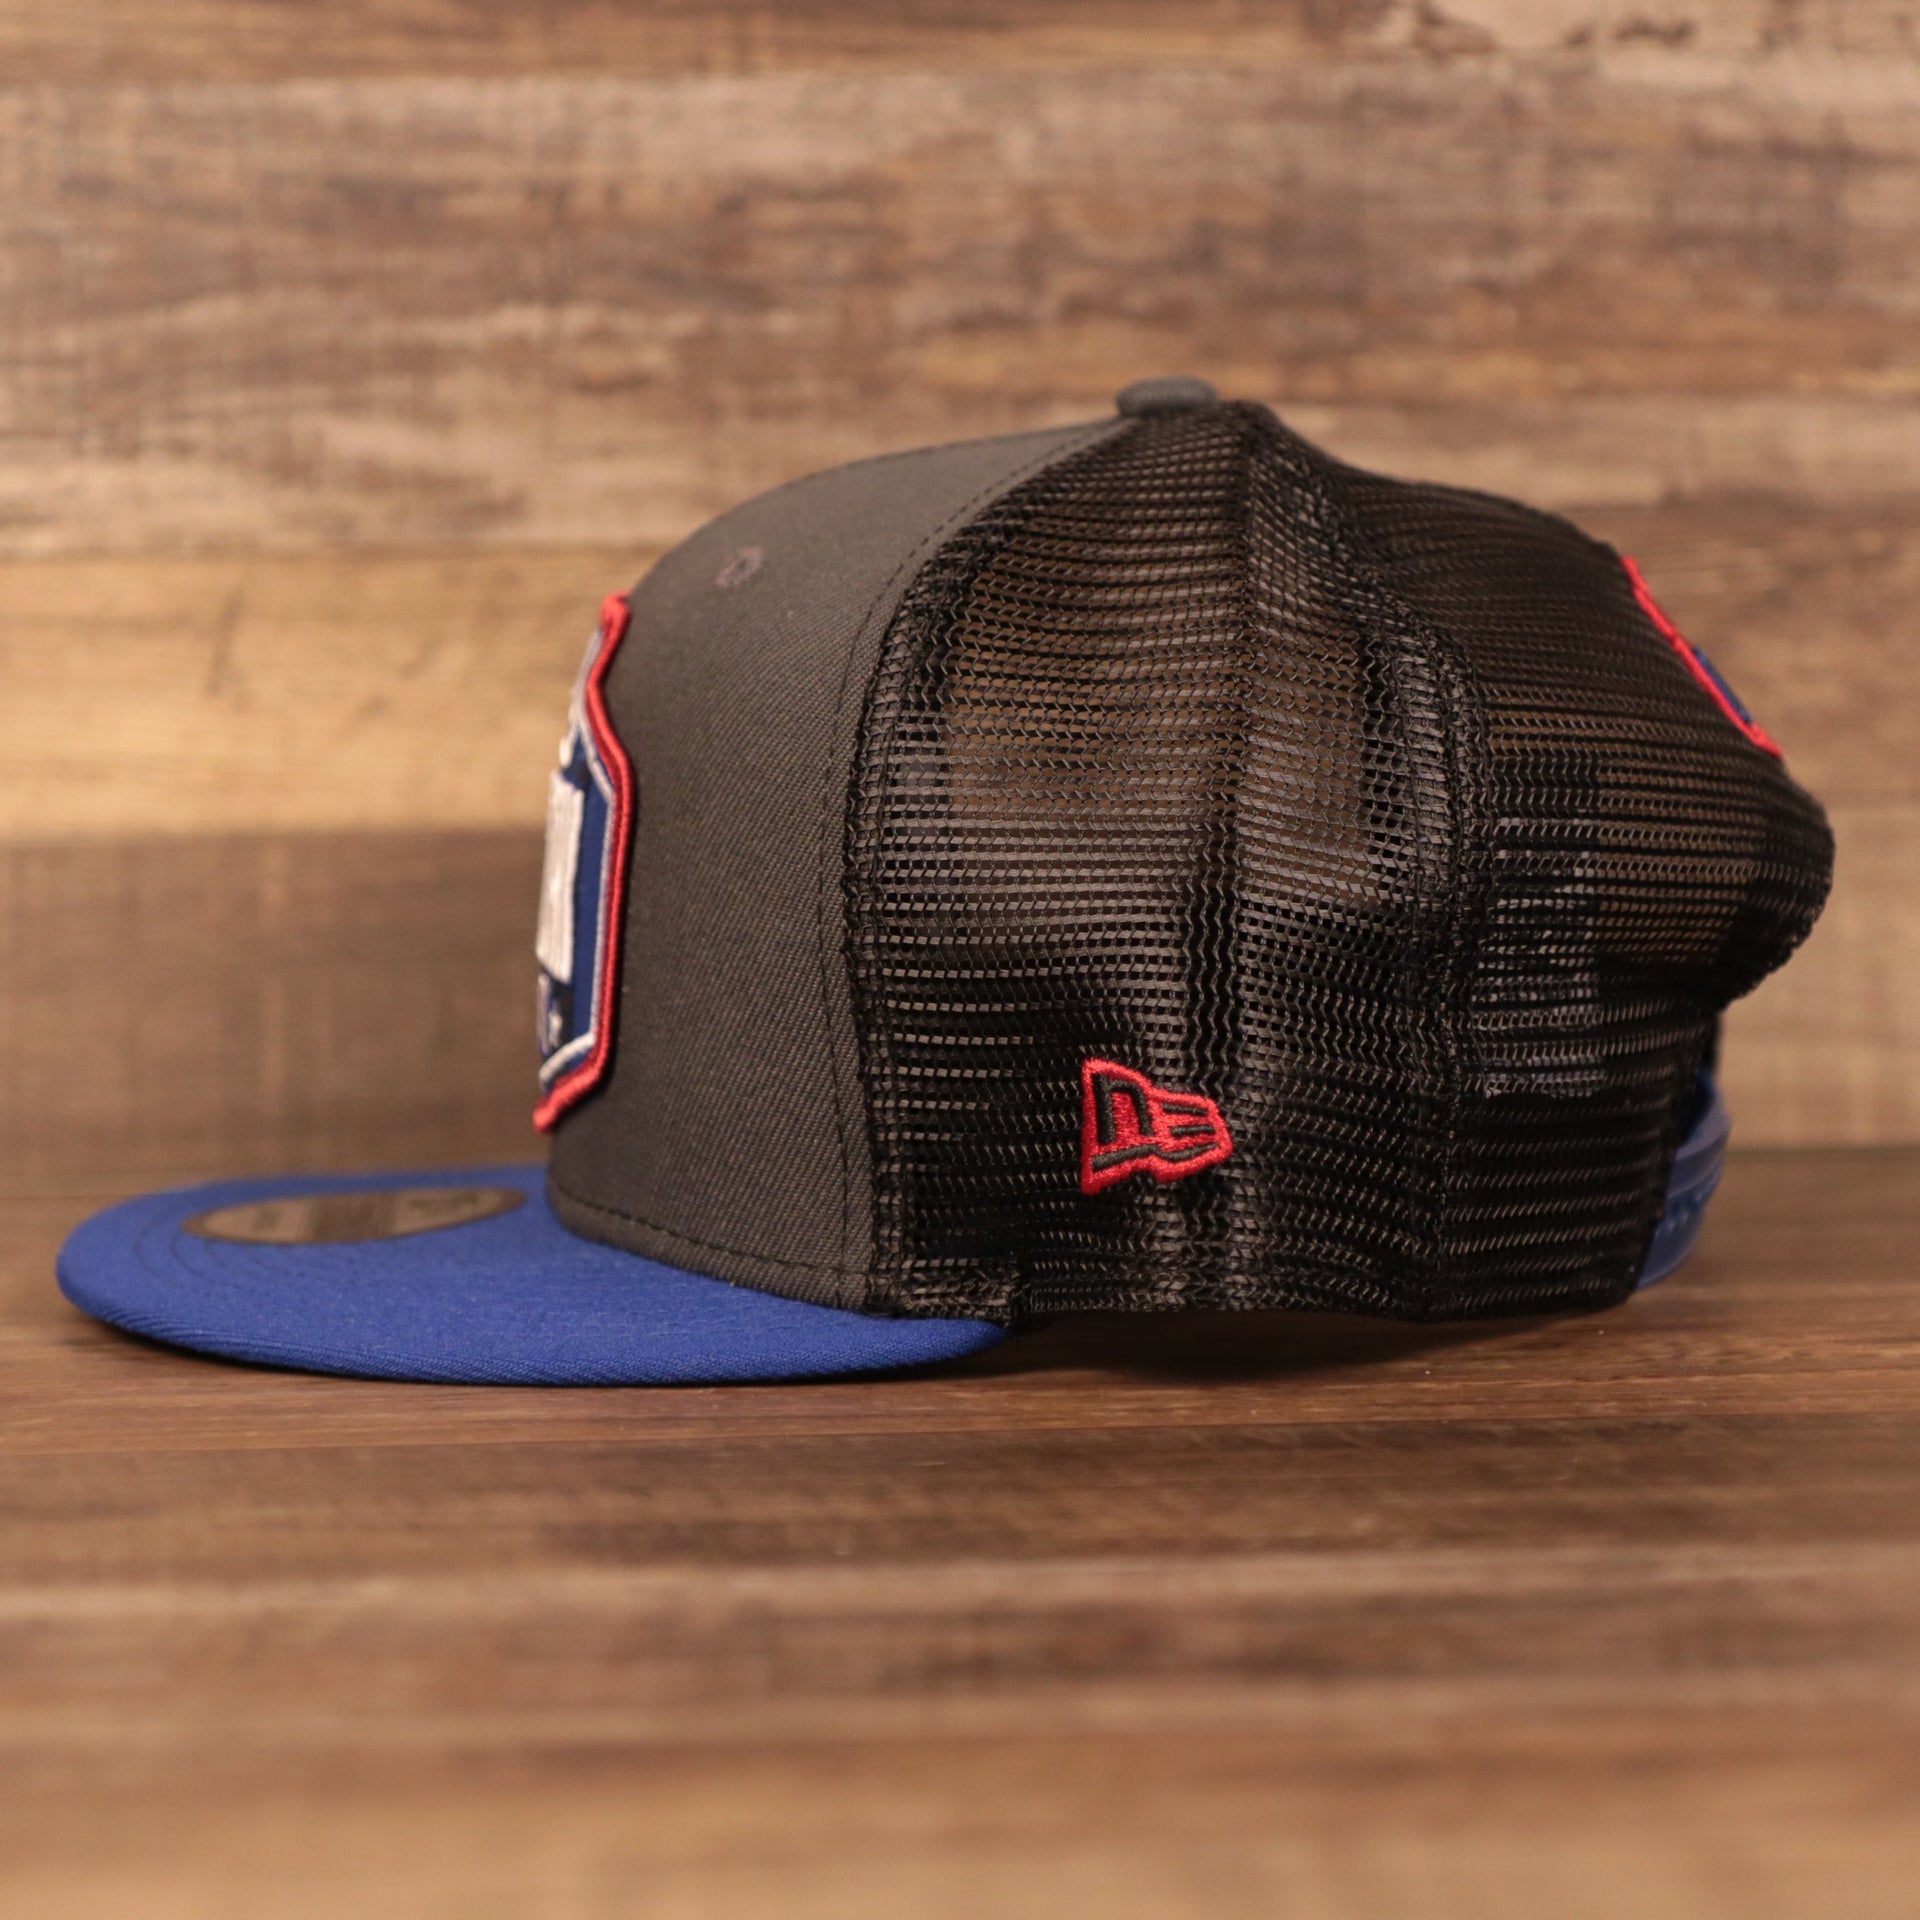 The wearer's right of the NY Giants NFL draft hat 2021 has the logo of New Era.